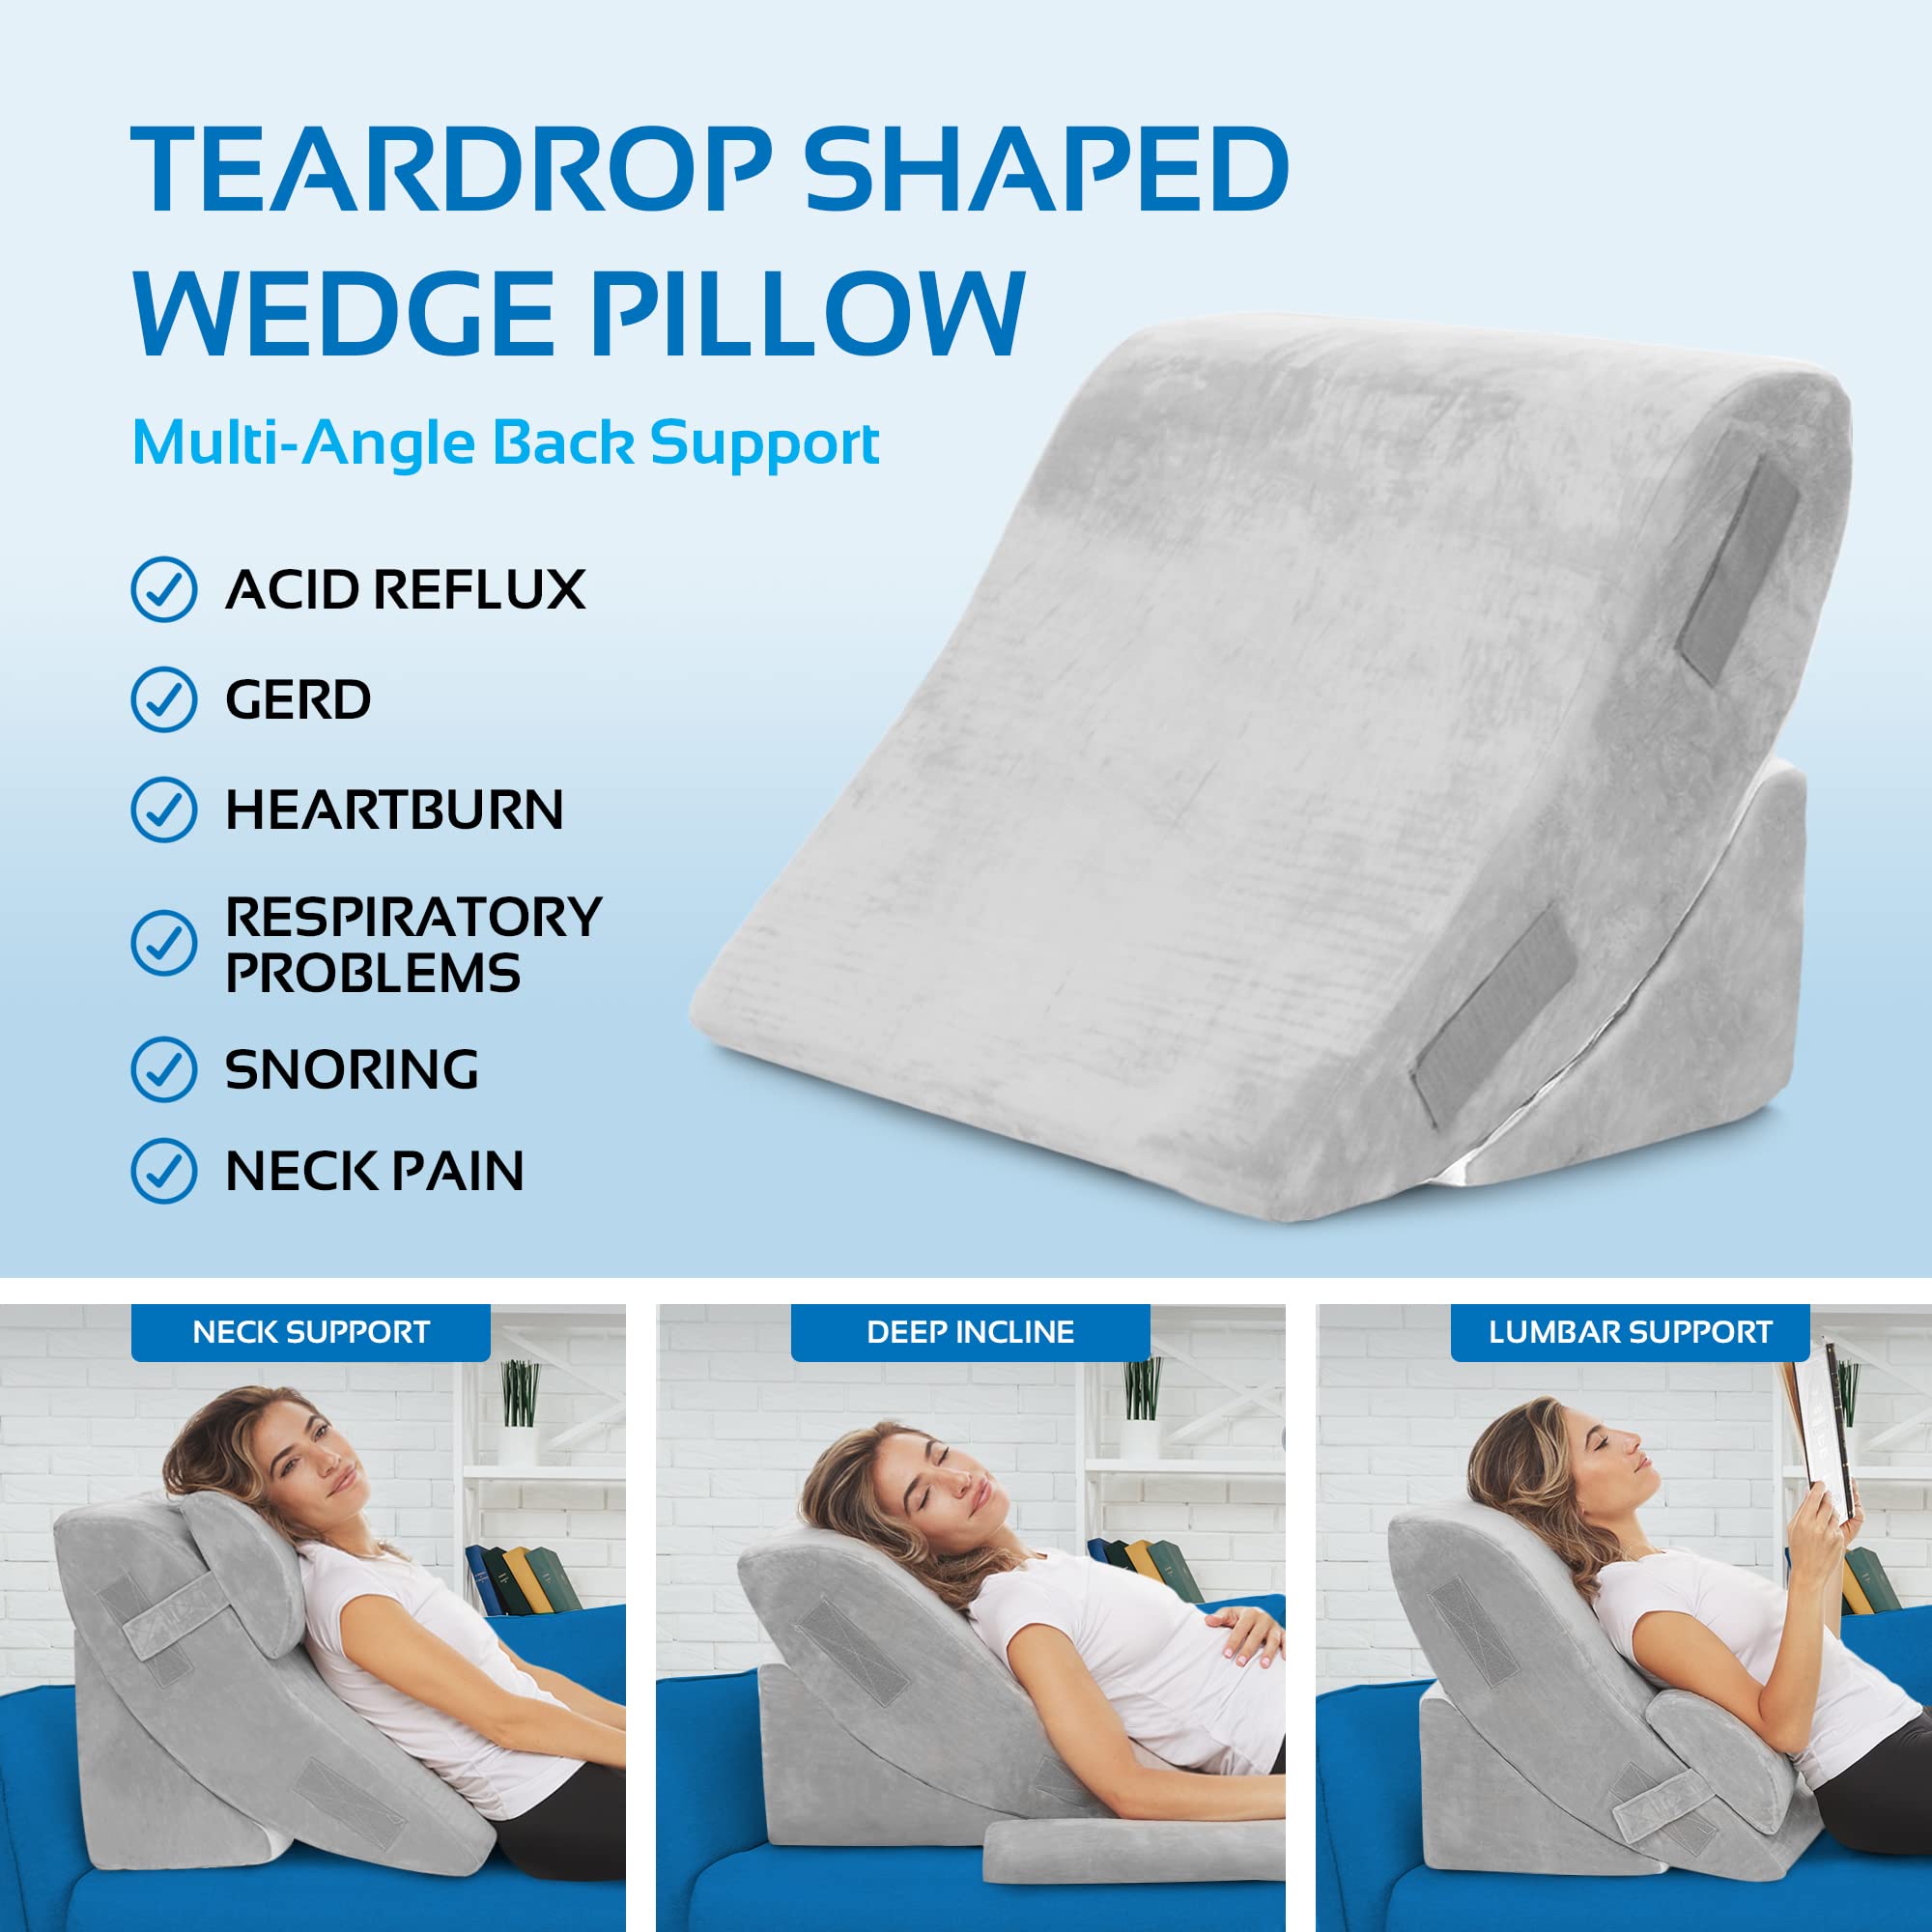 4 PC Bed Wedge Pillows Set - Orthopedic Wedge Pillow for Sleeping - Multi Angle Relief System for Back, Neck. Shoulder, and Leg Elevation Pillows | Acid Reflux, Anti Snoring - Machine Washable Cover